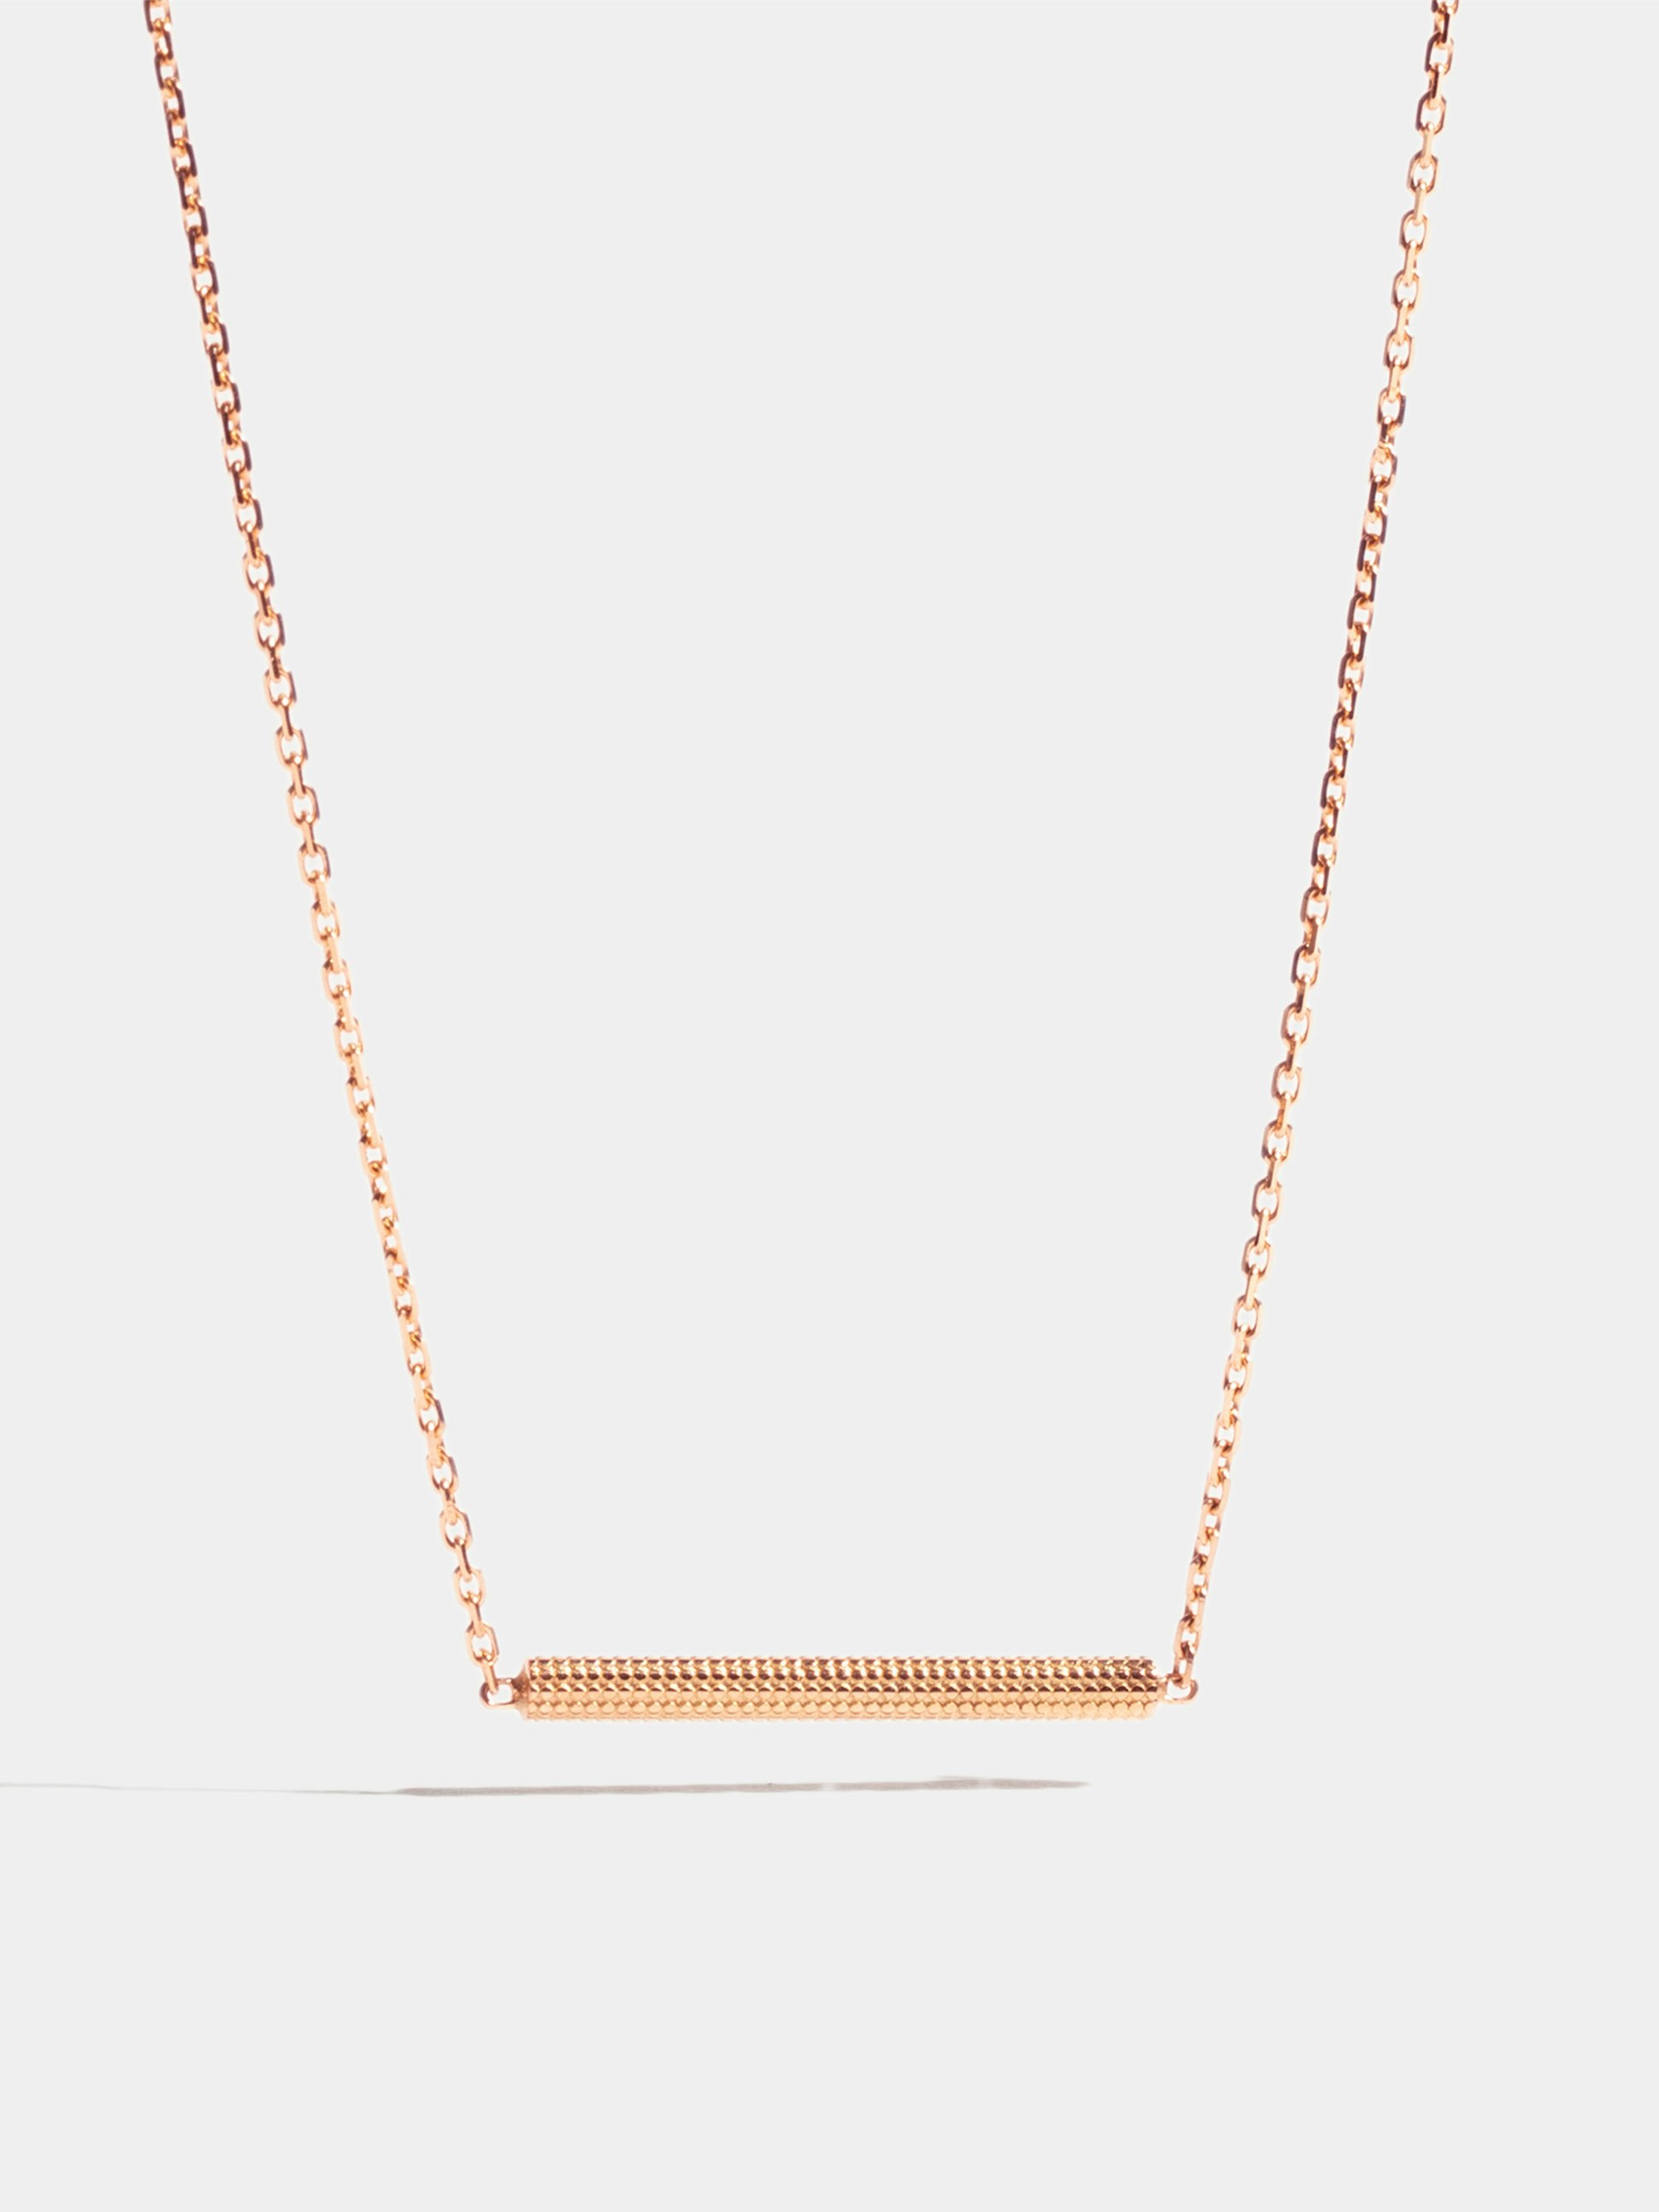 Anagramme "millegrains" motif in rose gold 18k Fairmined ethical, on 42 cm chain